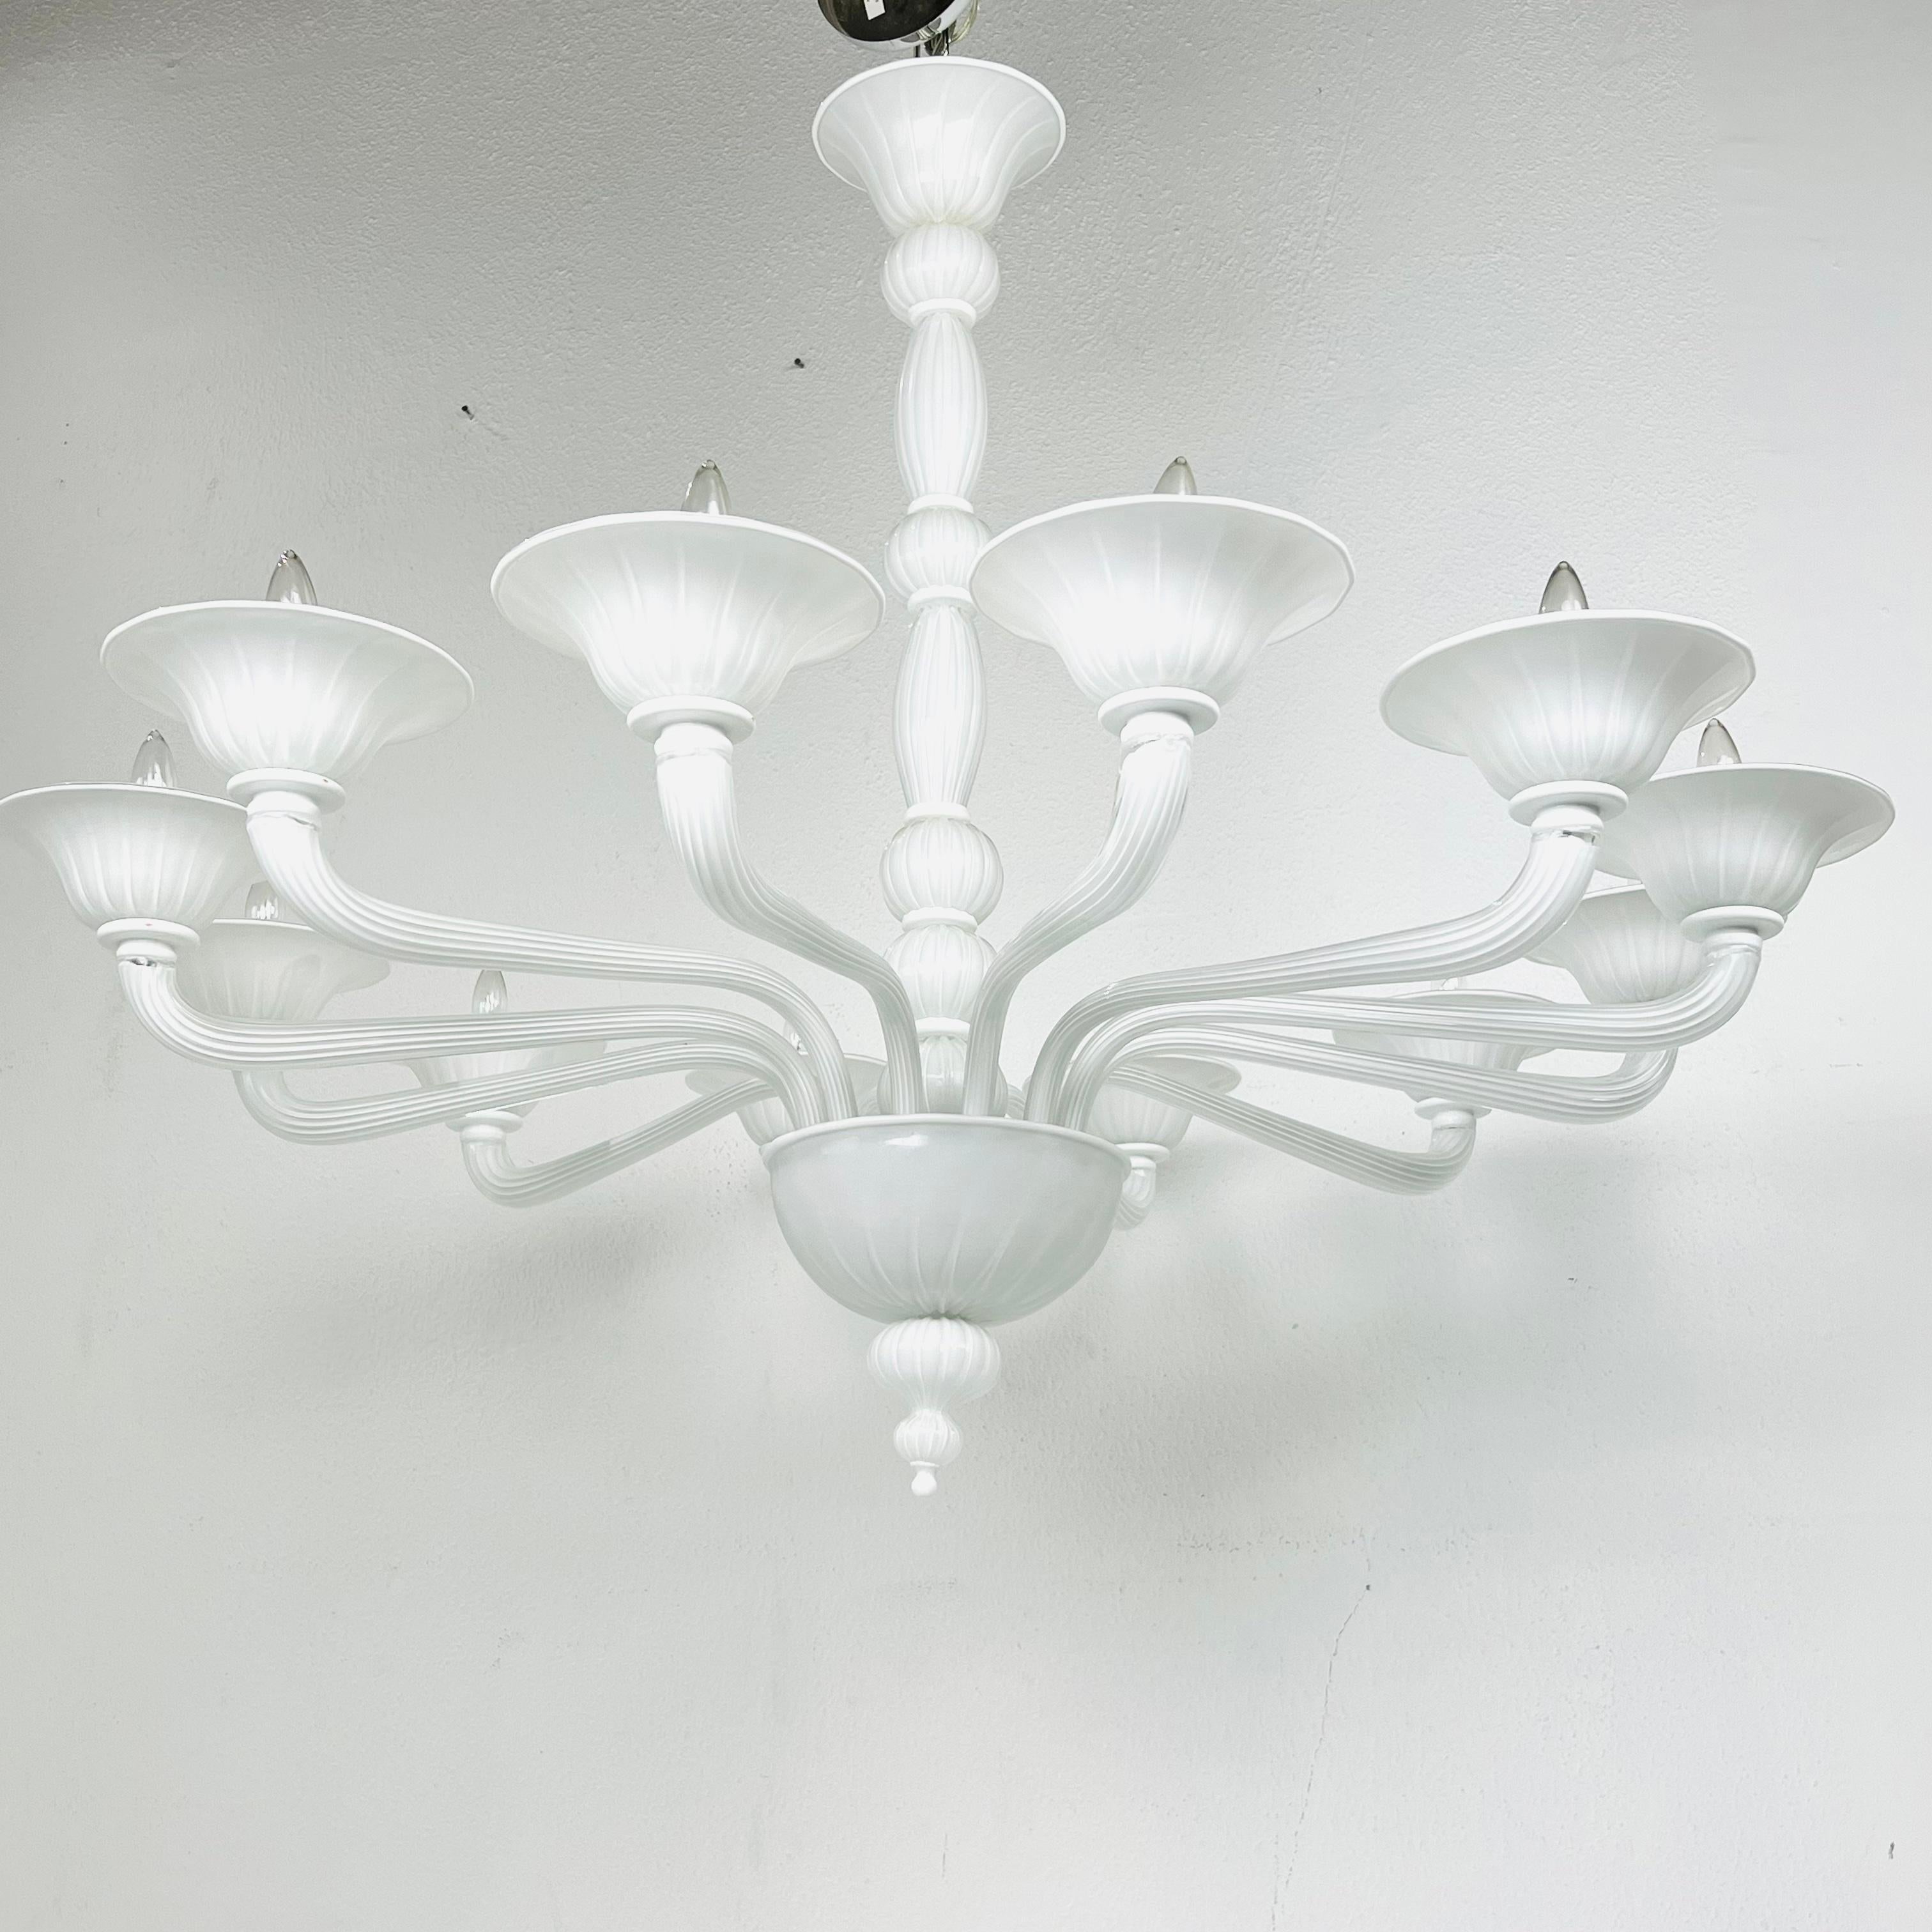 Large scale hand-blown Murano glass chandelier from Jan Showers. This gorgeous chandelier features a central column connected to a lower basket from which 12 graceful, curved arms emerge to hold large cup shades. Interesting scale and shape and